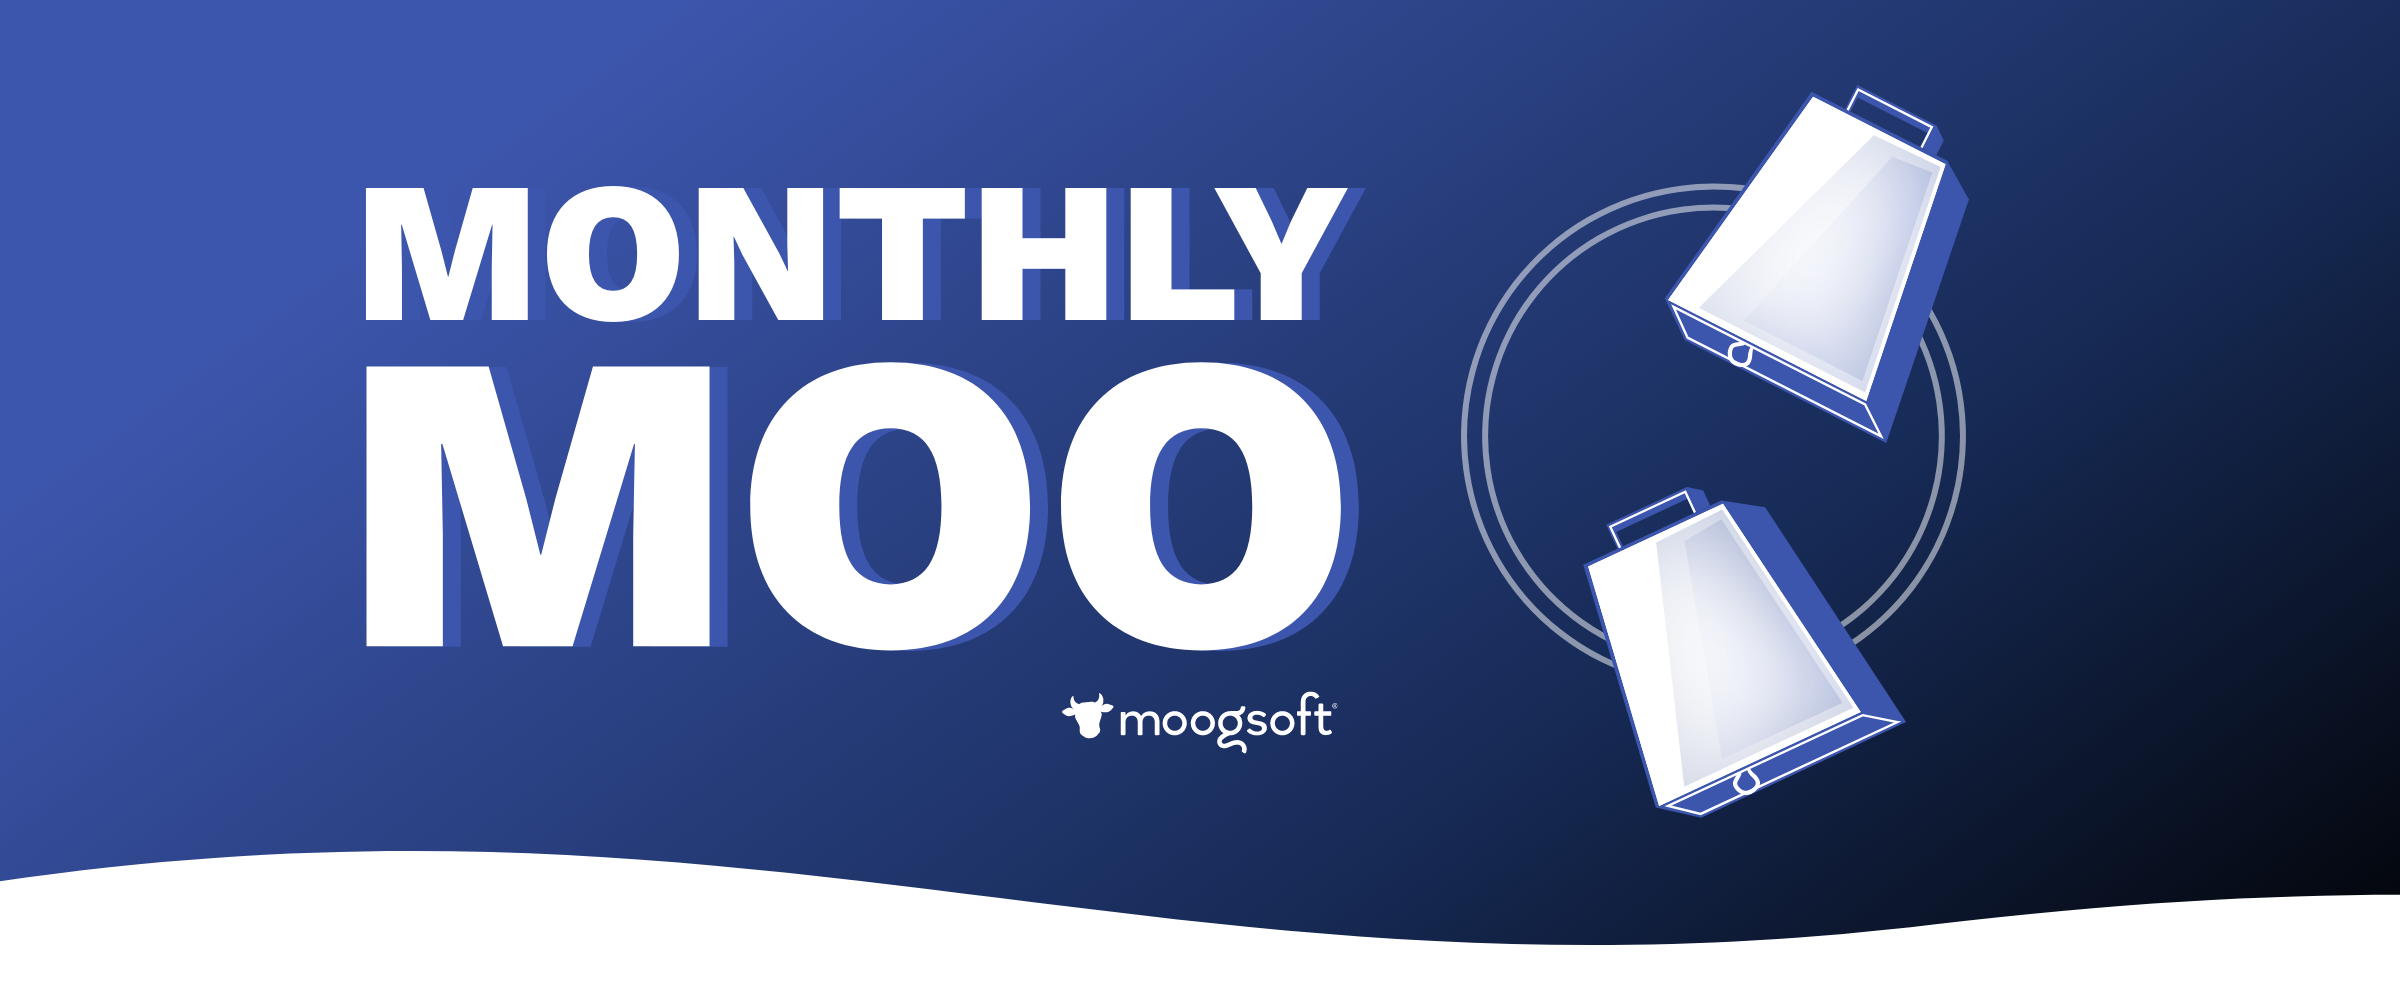 Monthly Moo Banner 2022.png